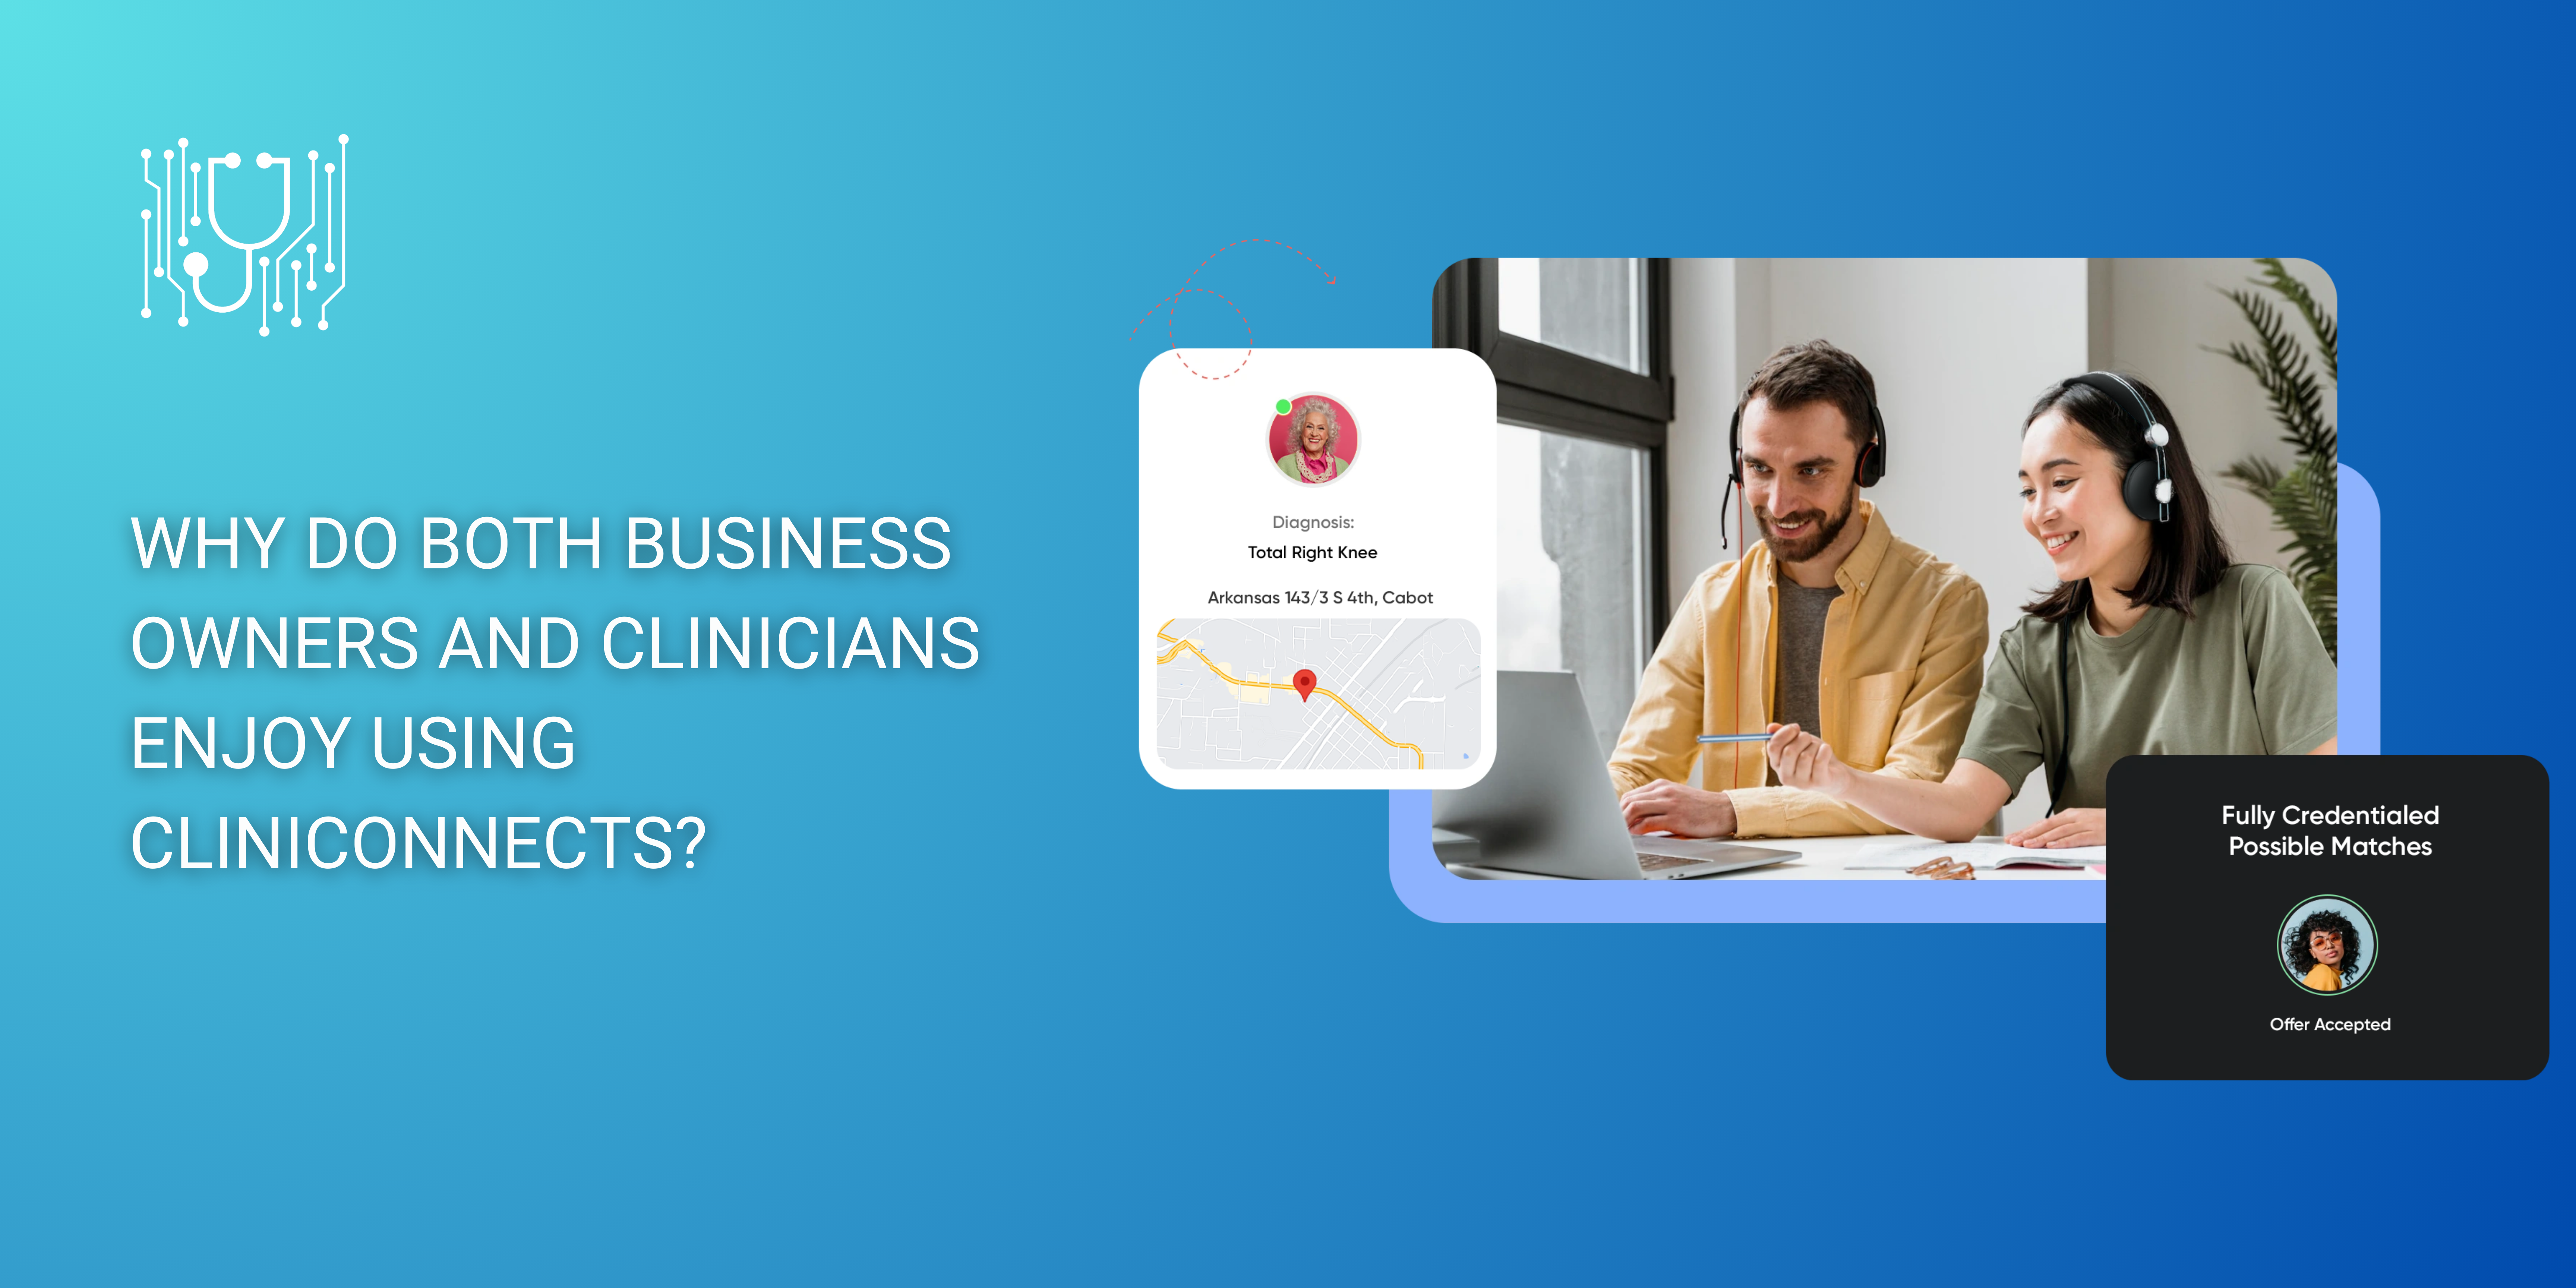 Why Do Both Business Owners and Clinicians Enjoy Using cliniCONNECTS?